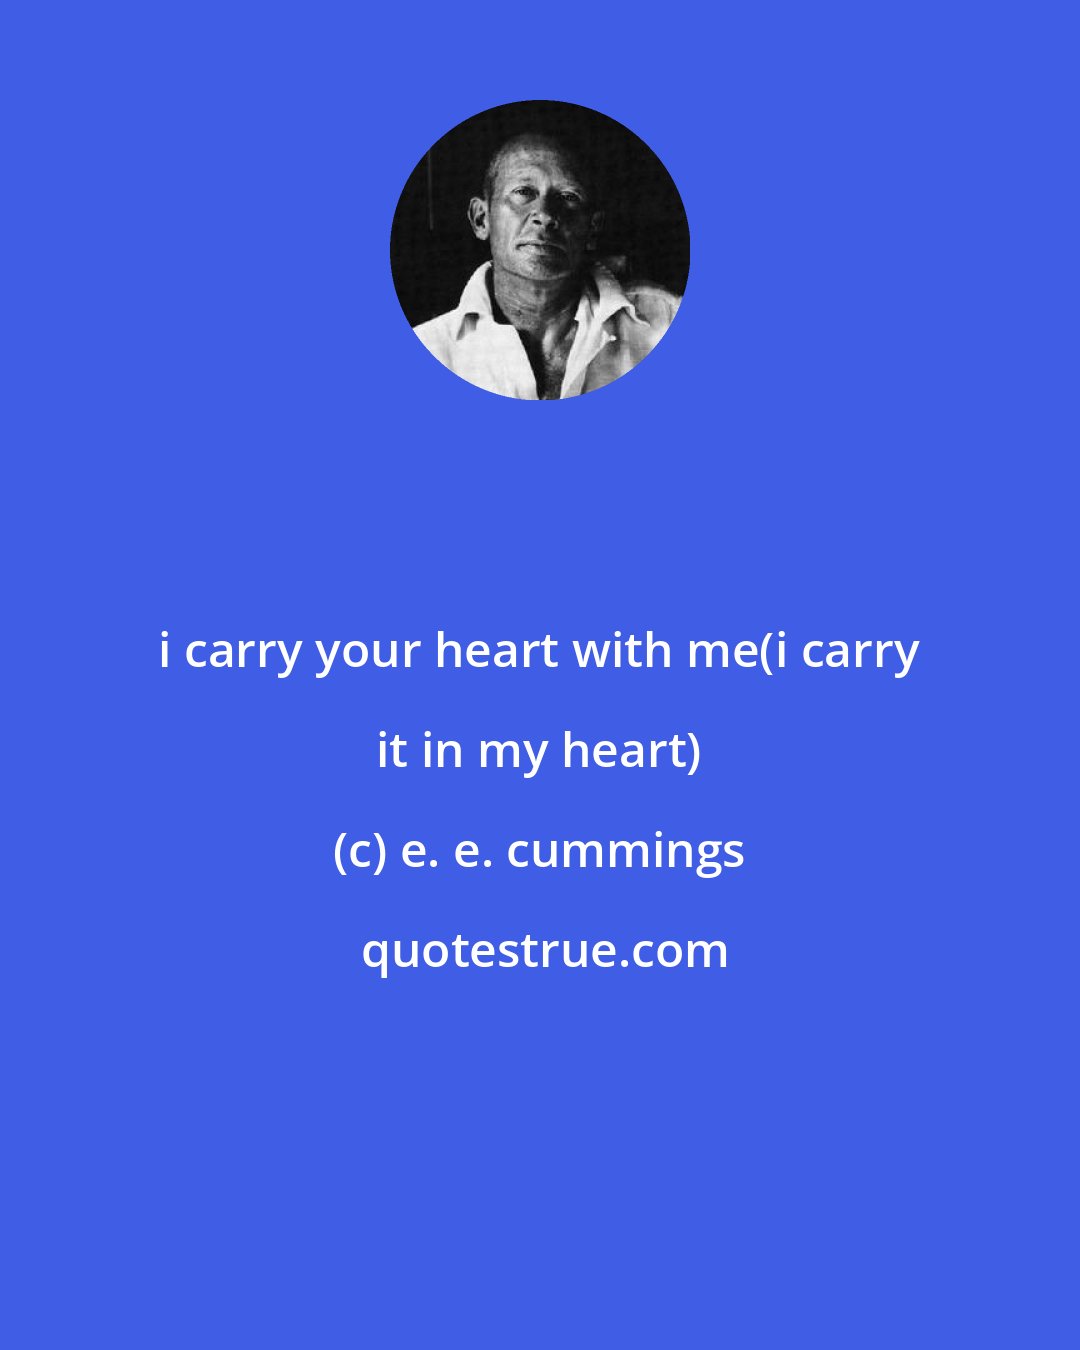 e. e. cummings: i carry your heart with me(i carry it in my heart)